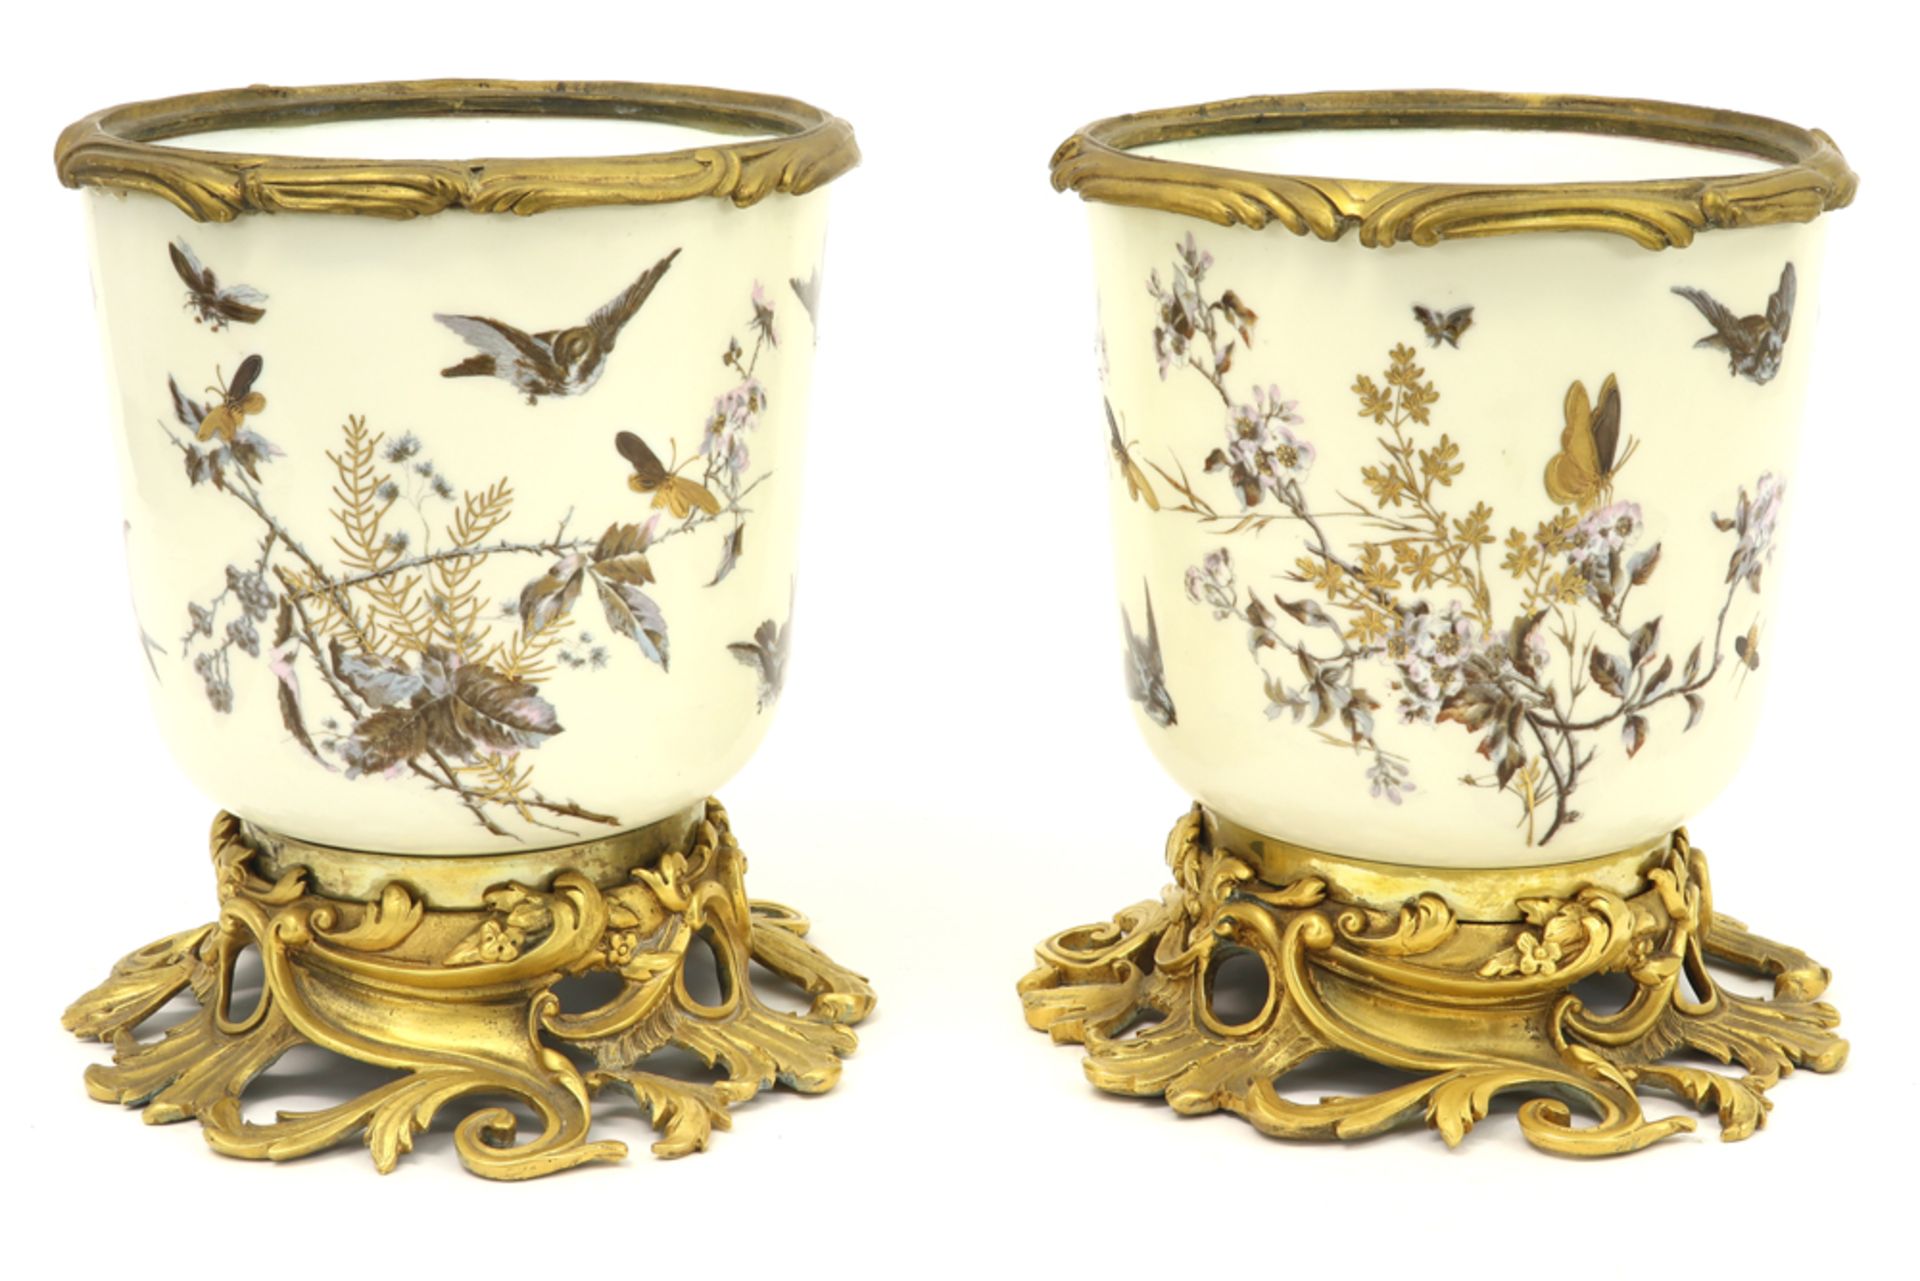 pair of 19th Cent. jardiniers in porcelain from Paris with a gilded bronze mounting||Paar